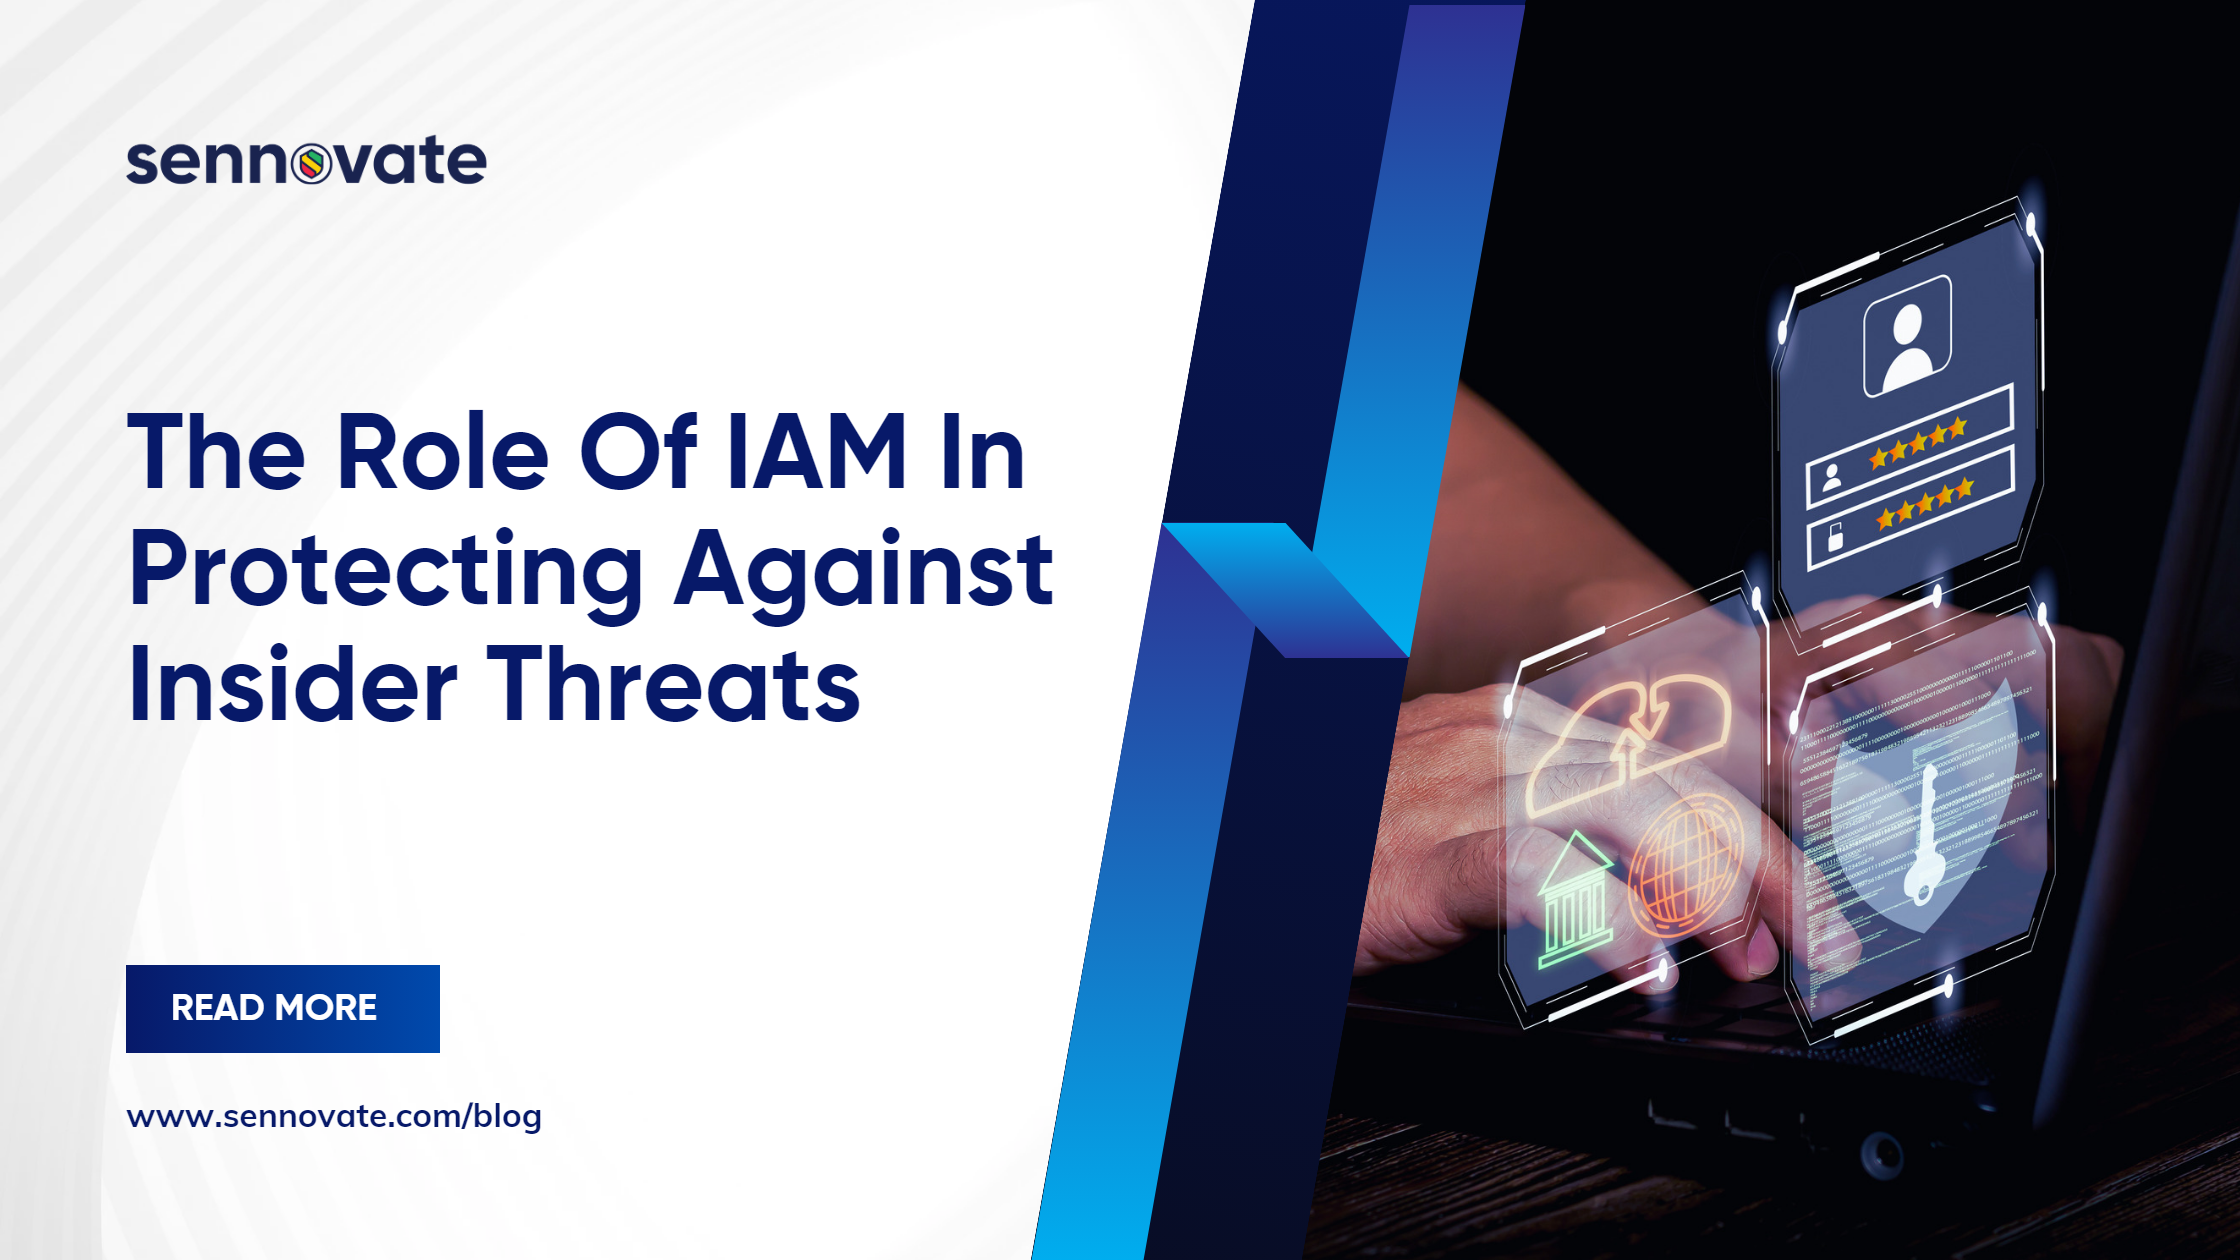 The role of IAM in Protecting Against Insider Threats